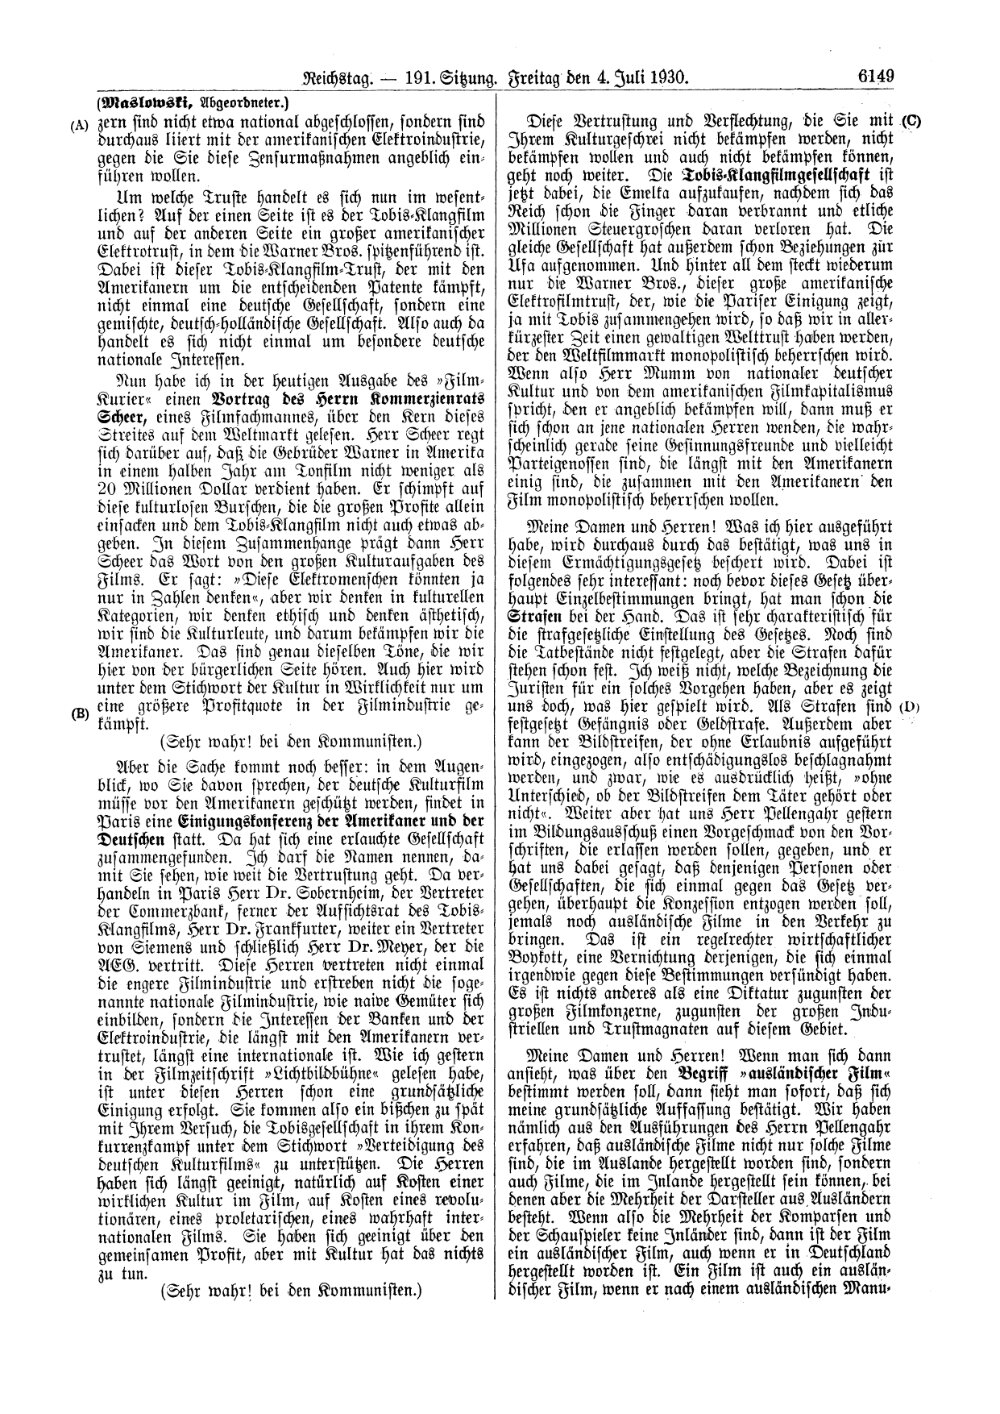 Scan of page 6149